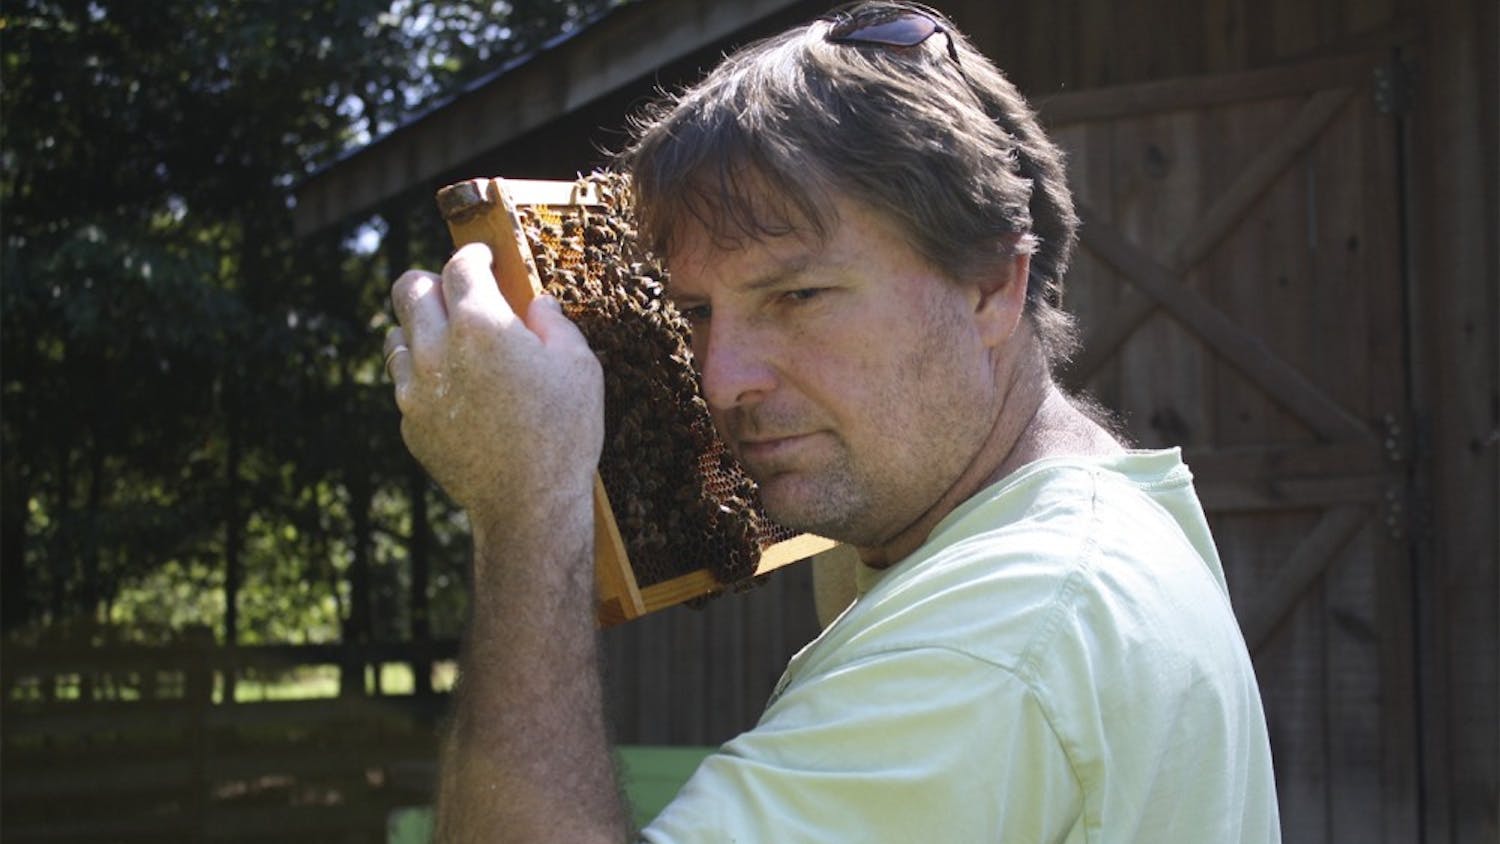 Marty Hanks, the creator of "Just Bee Apiary," a bee farm located on his land just outside of downtown Chapel Hill, checks on his honeybees. Hanks makes it a priority to raise his thousands of bees without the use of unnatural chemicals.

